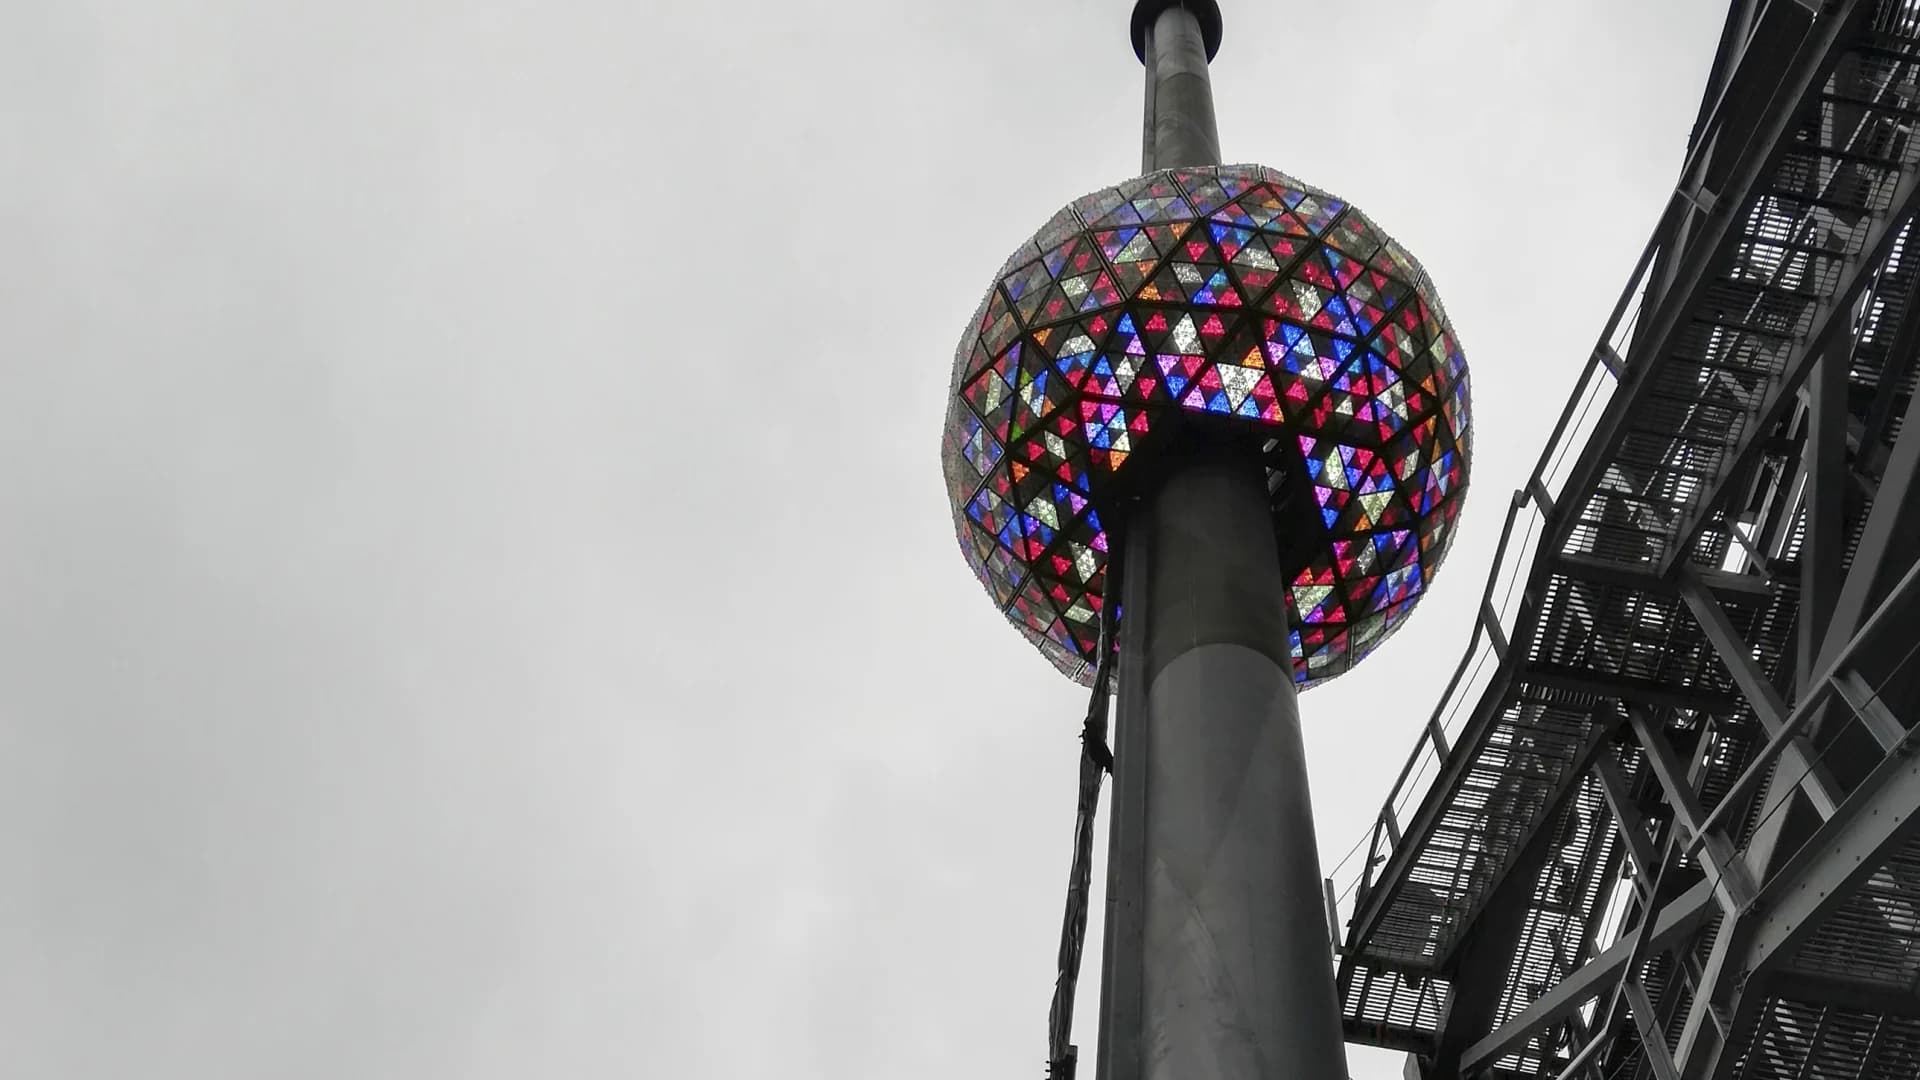 Ready to end 2020 in a spectacular way? Airbnb and Nasdaq offer a chance to sleep under the New Year's Eve Ball